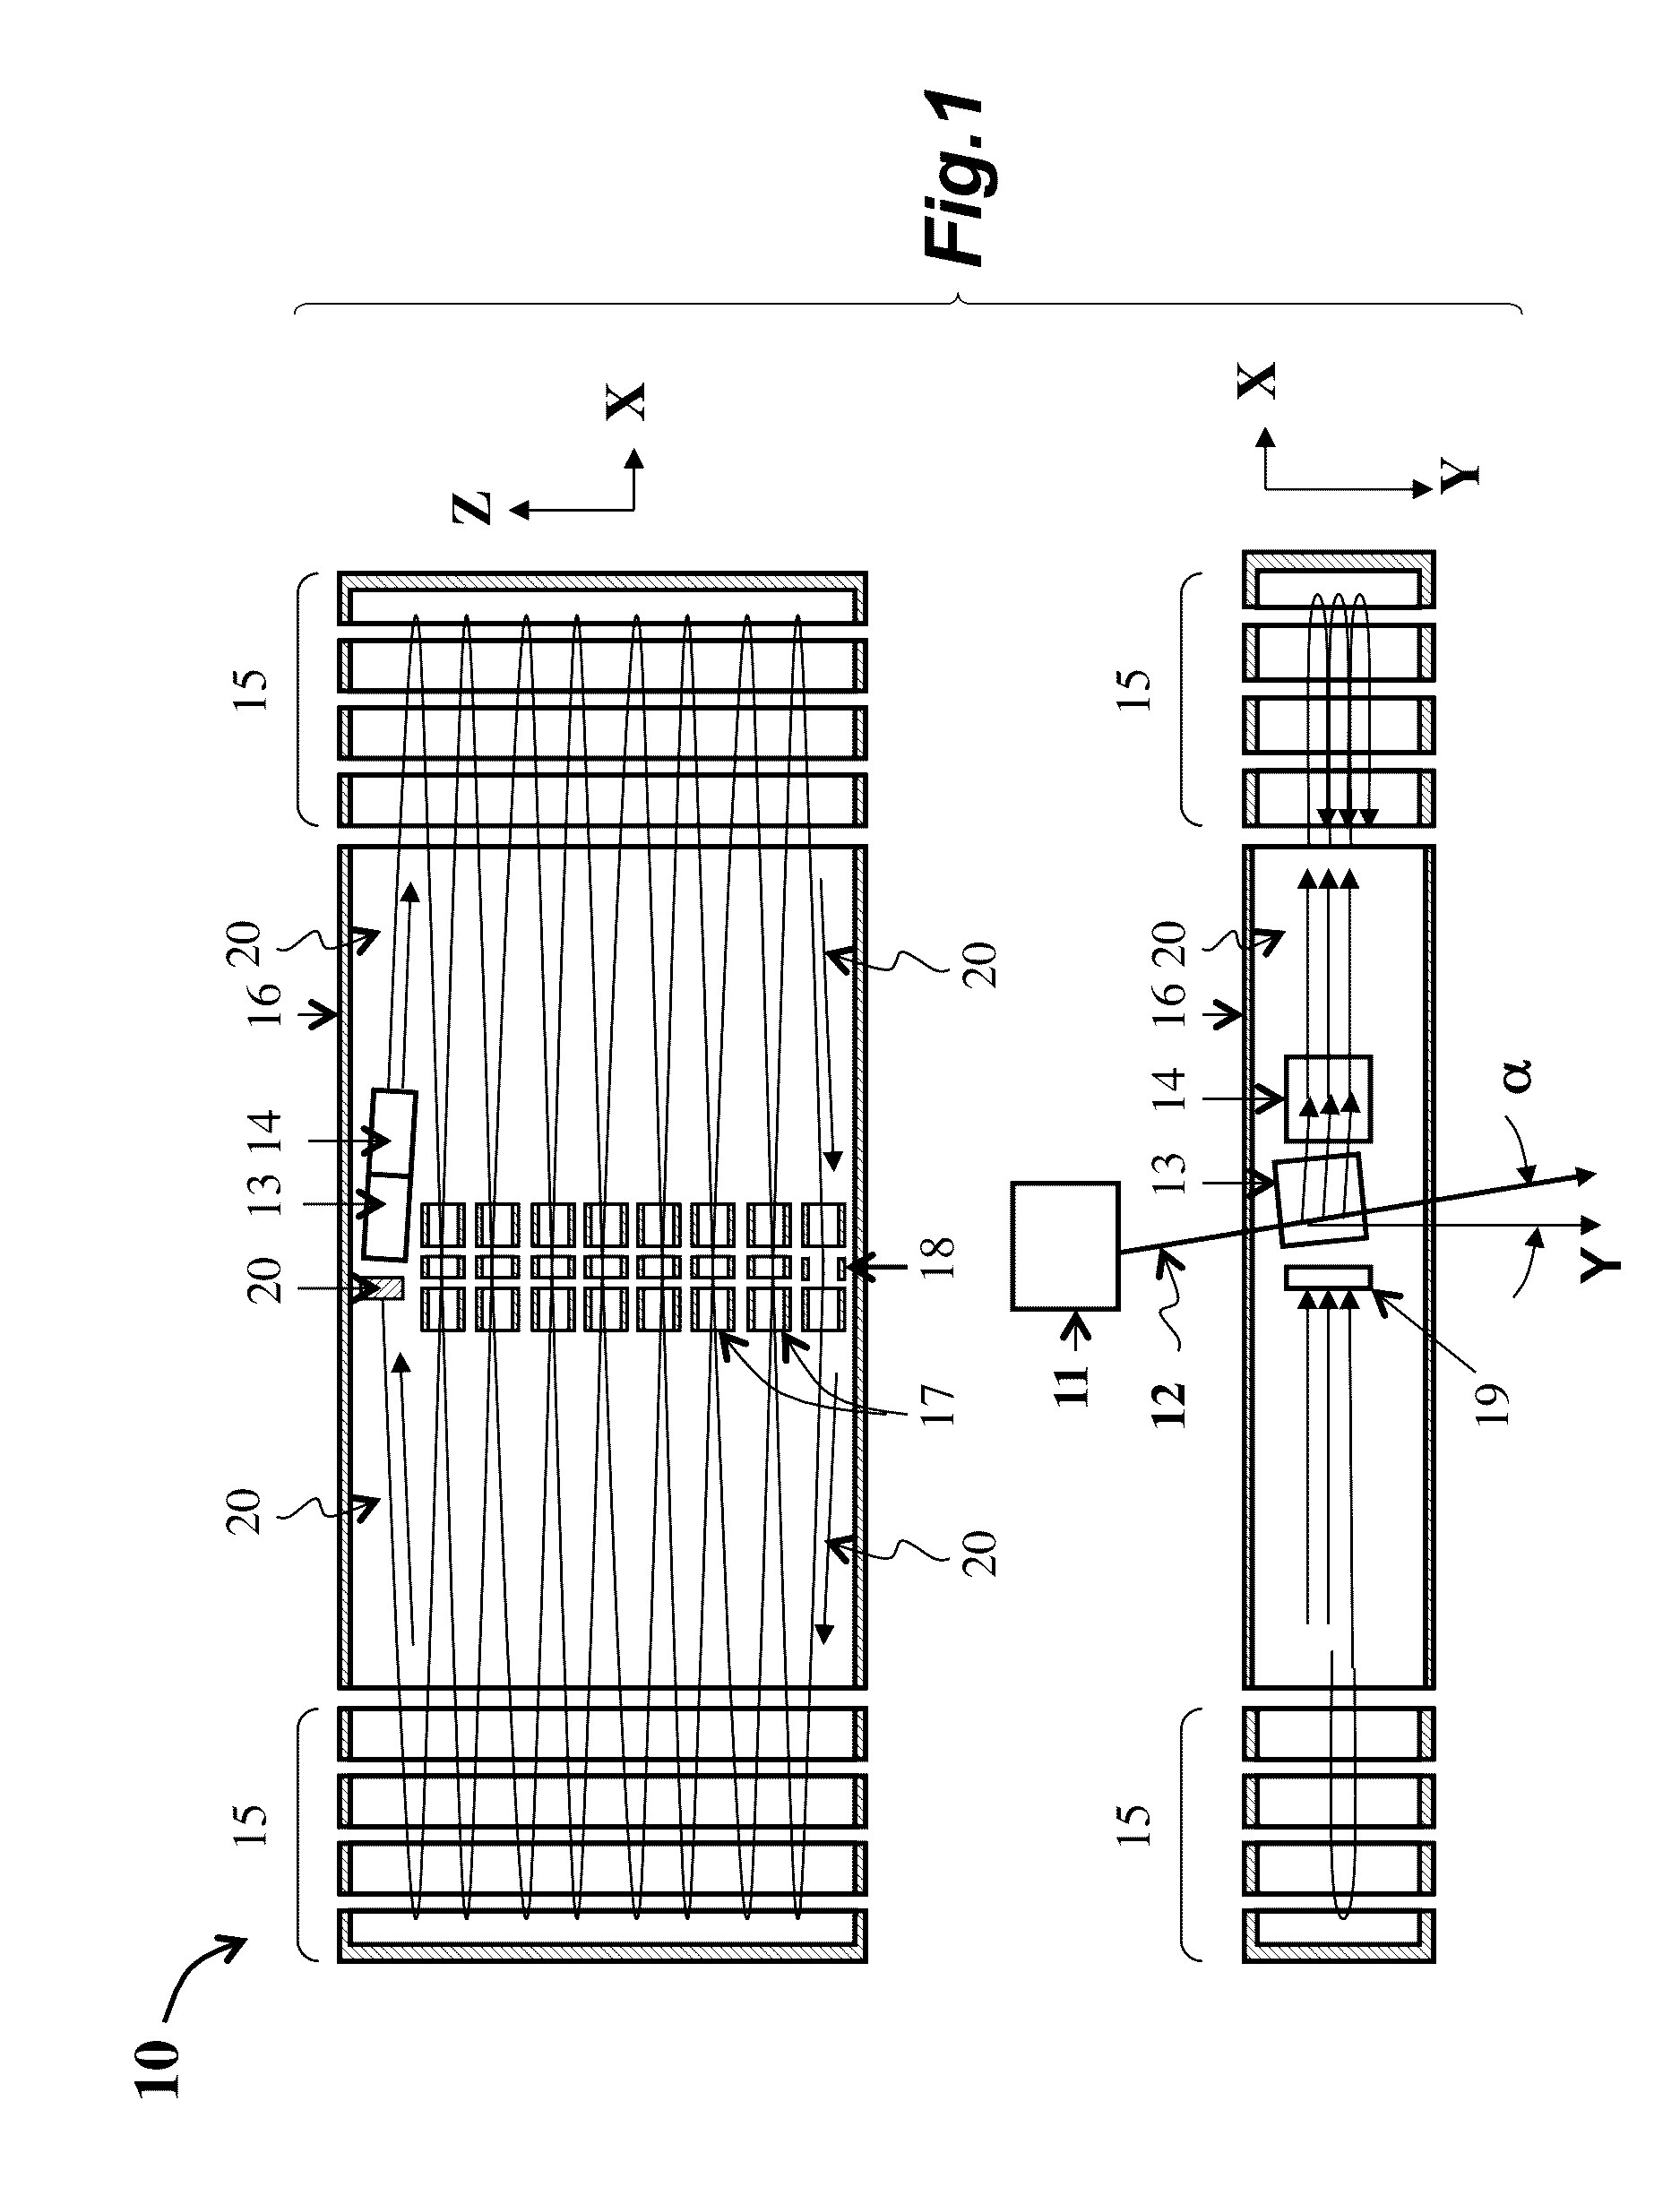 Multi-Reflecting Time-of-Flight Mass Spectrometer with Axial Pulsed Converter